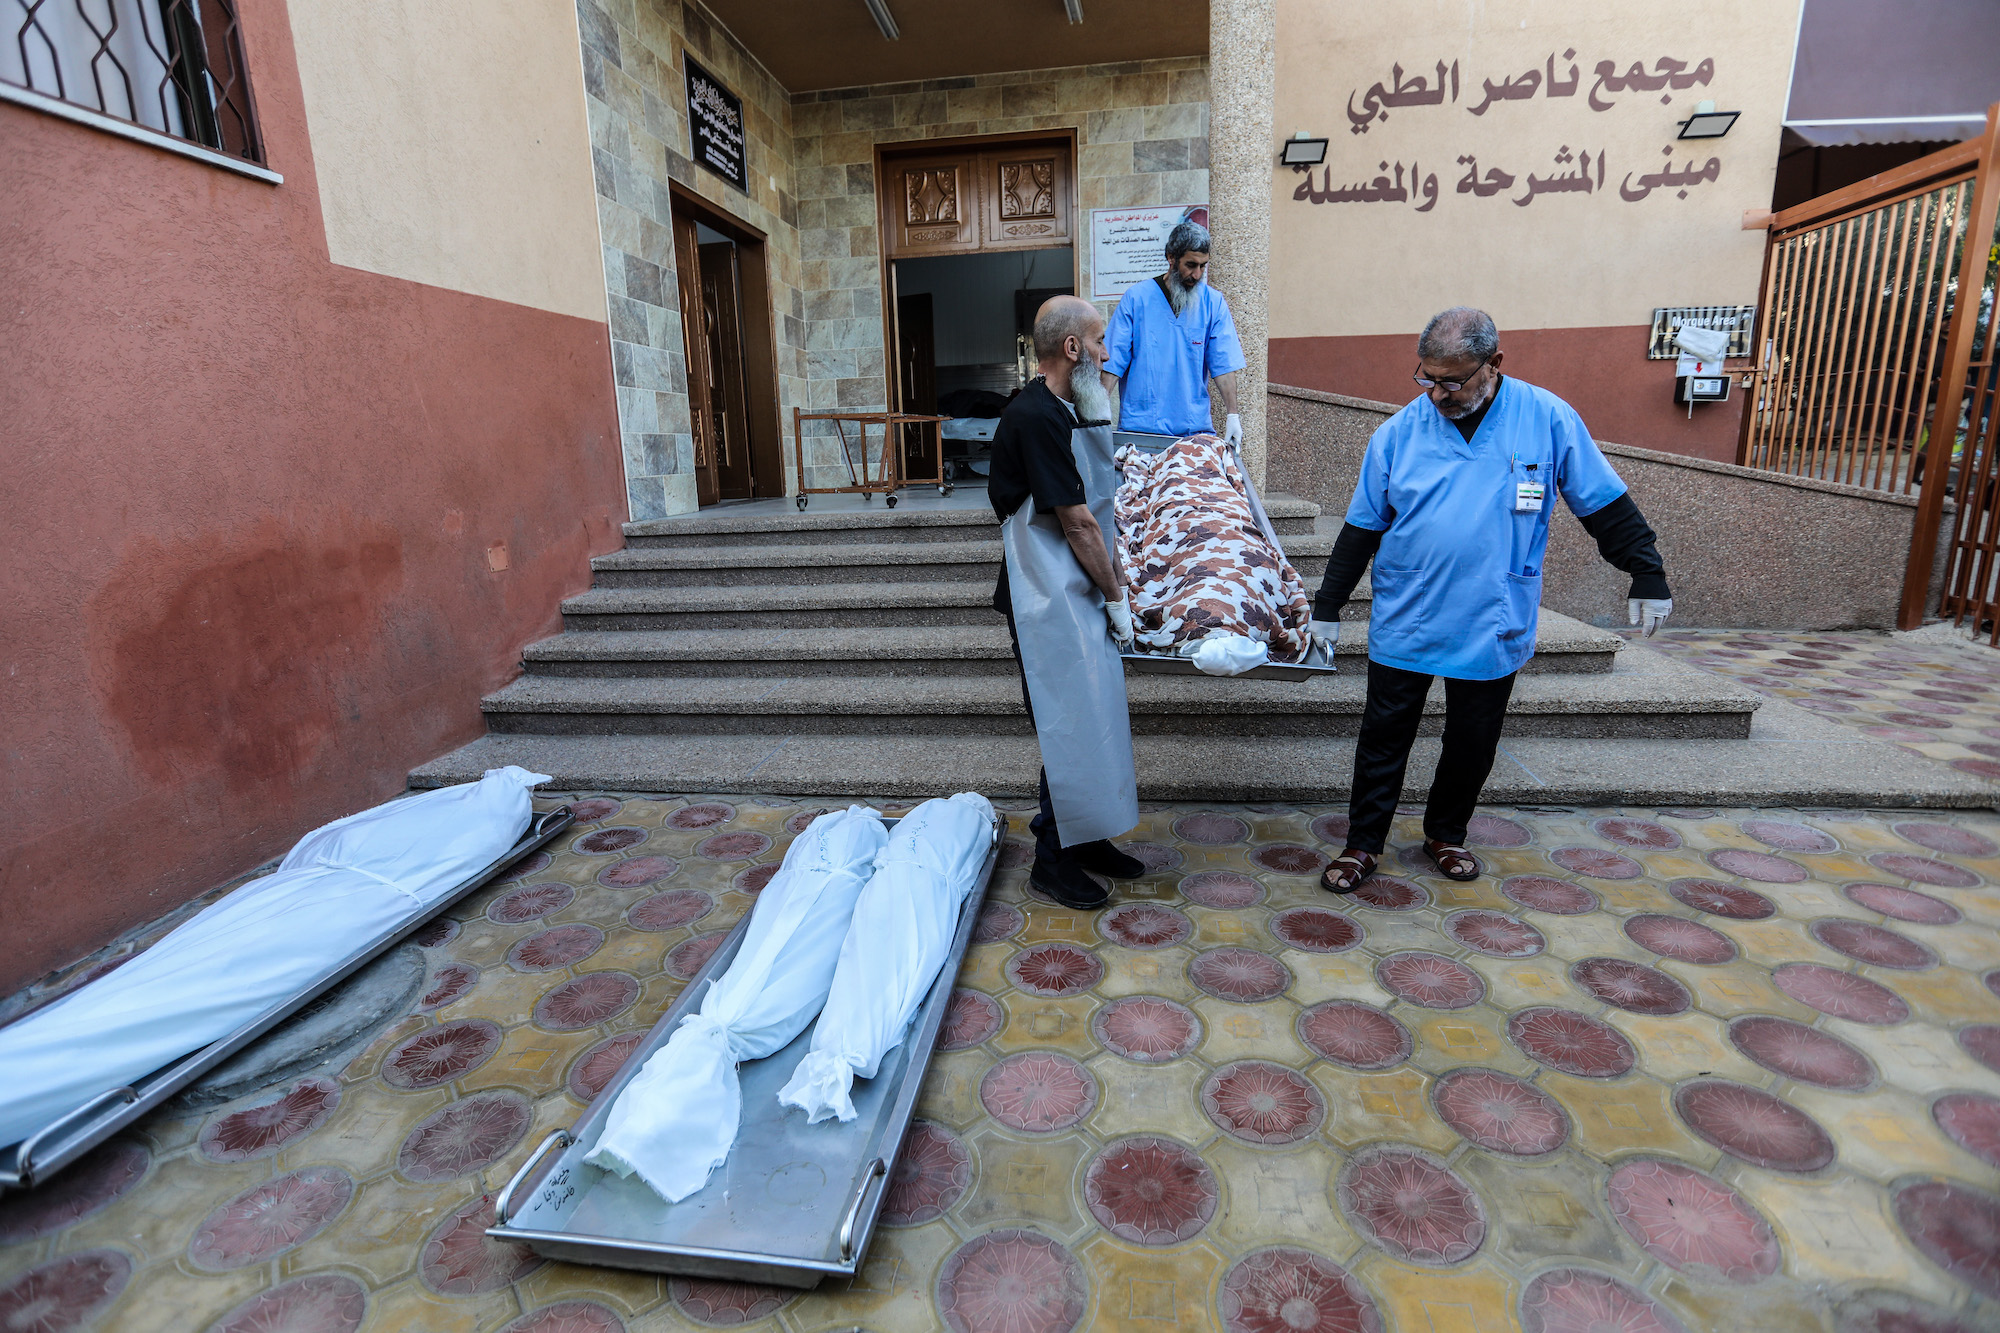 Bodies of Palestinians killed in an airstrike are seen in Khan Younis on Saturday.